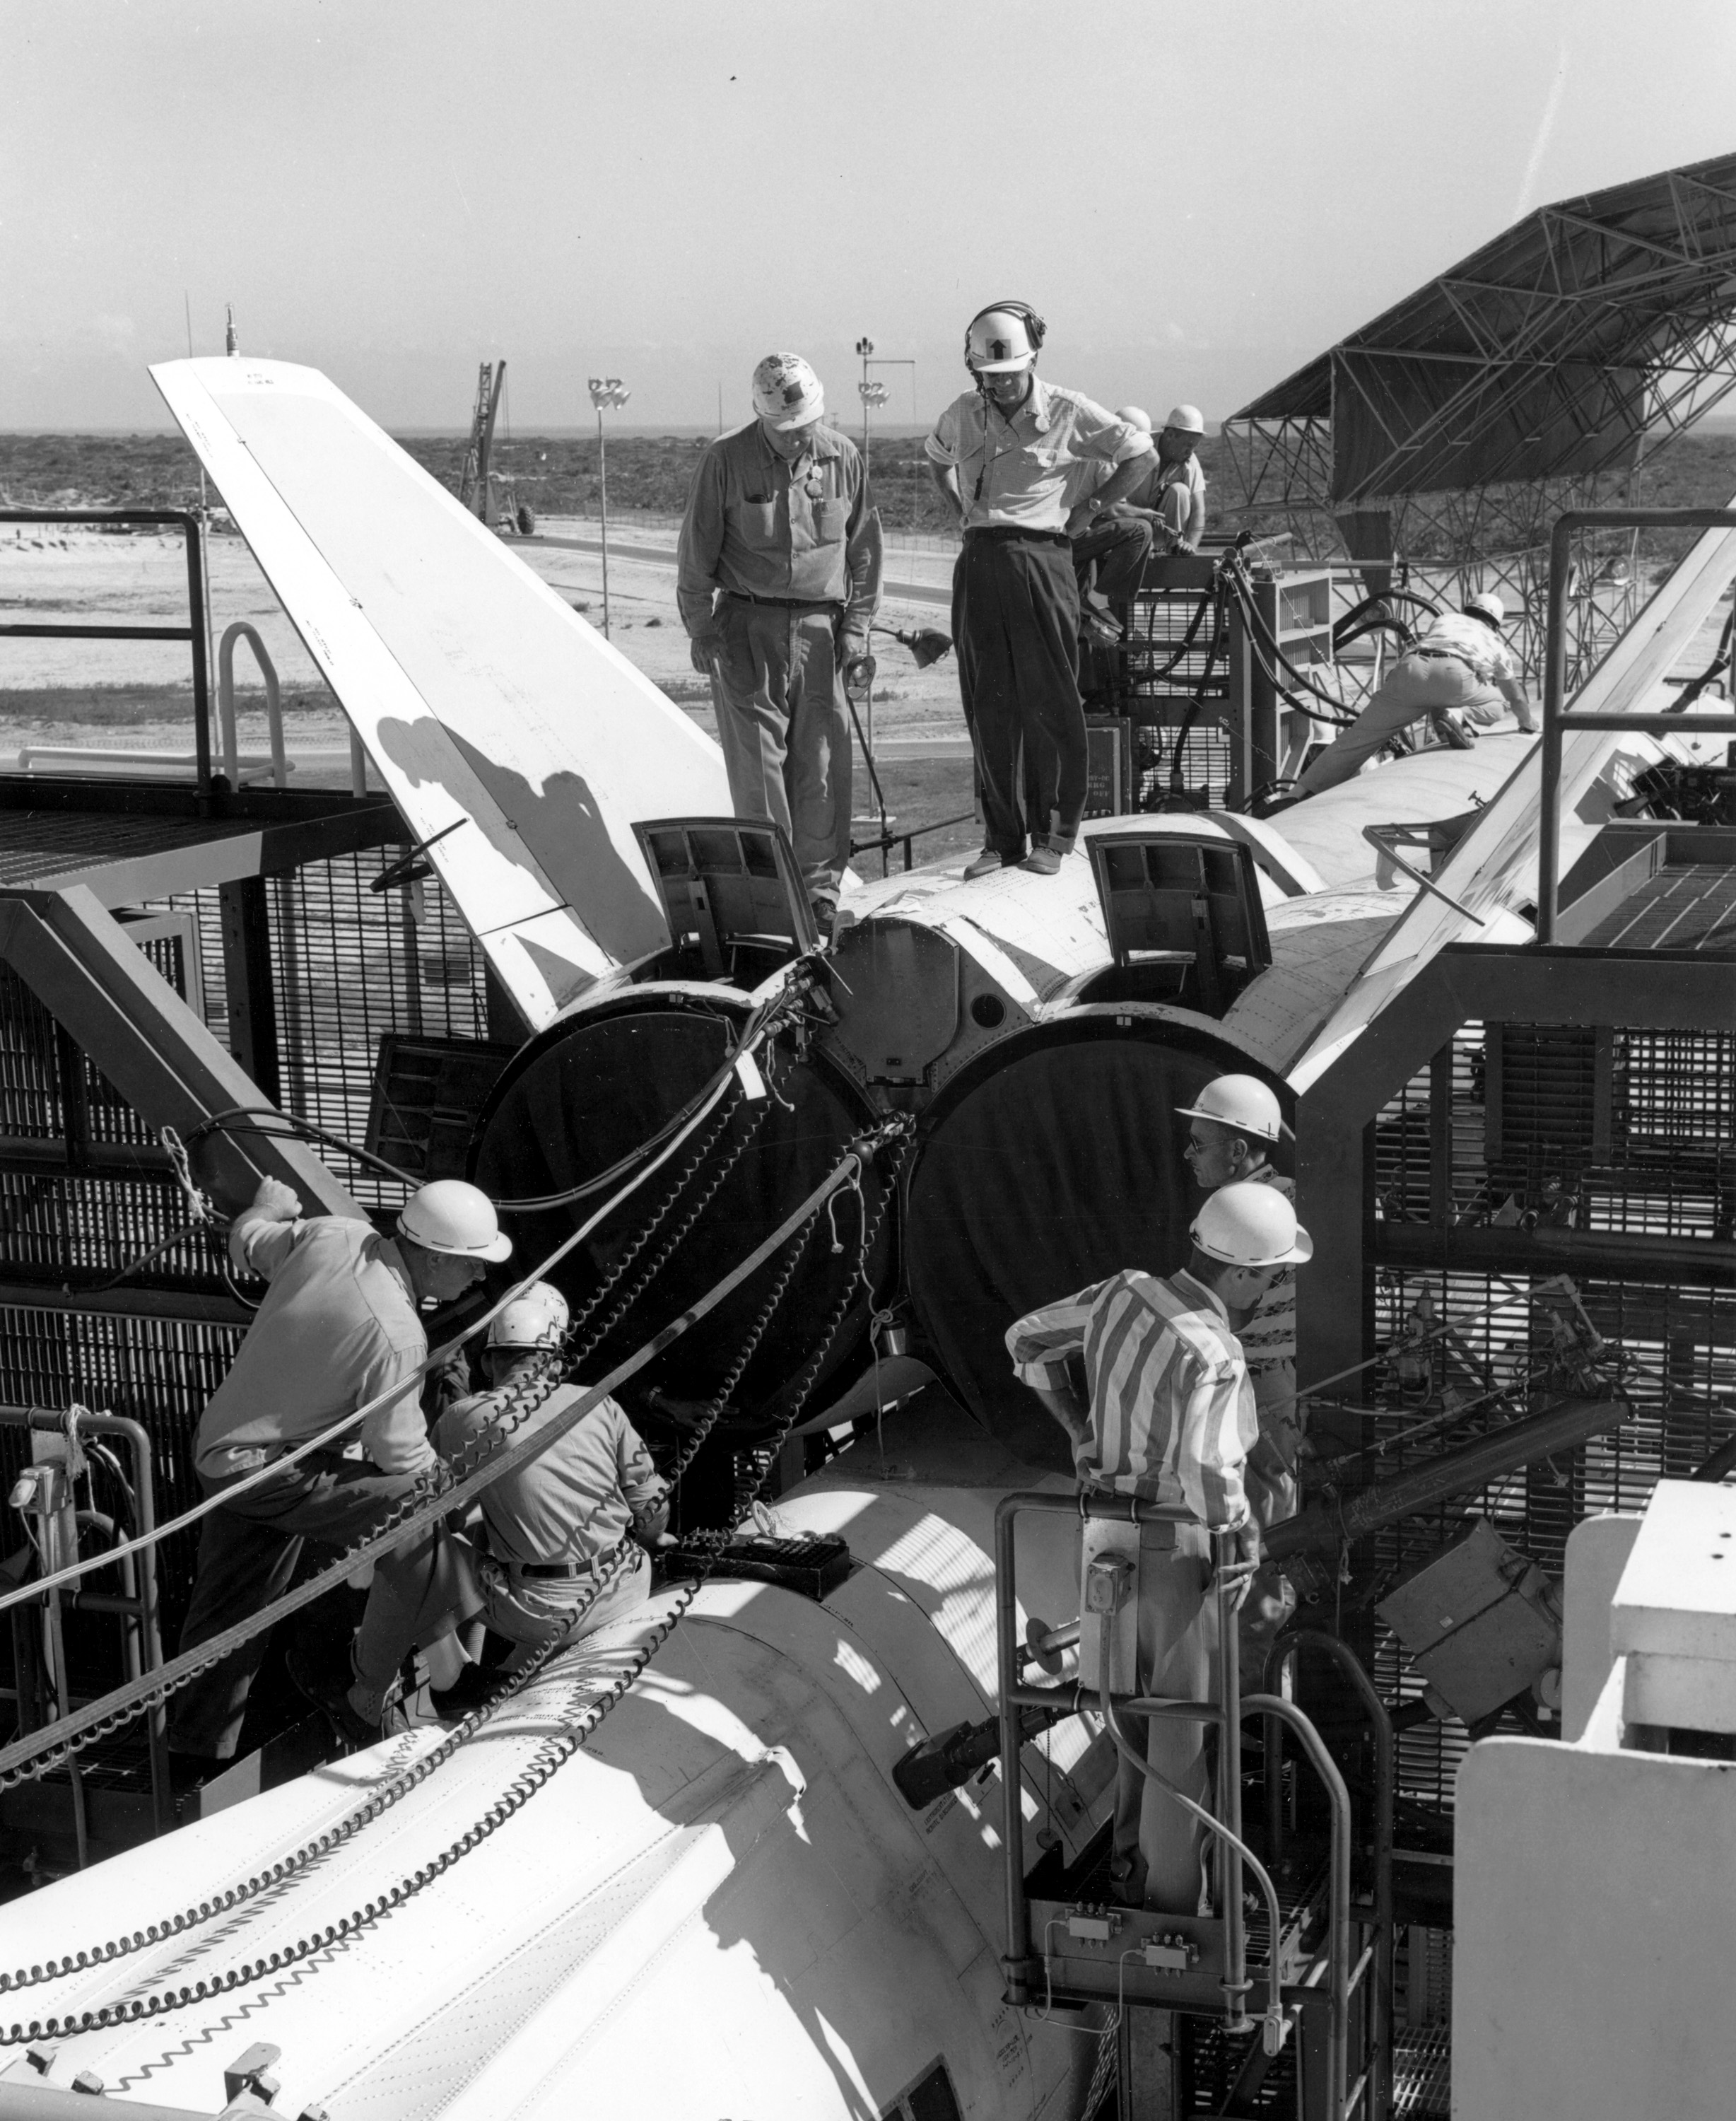  NAA technicians put in long hours over several months in preparation for the first Navaho launch out of the Cape. Technical difficulties delayed the launch until March of 1957.